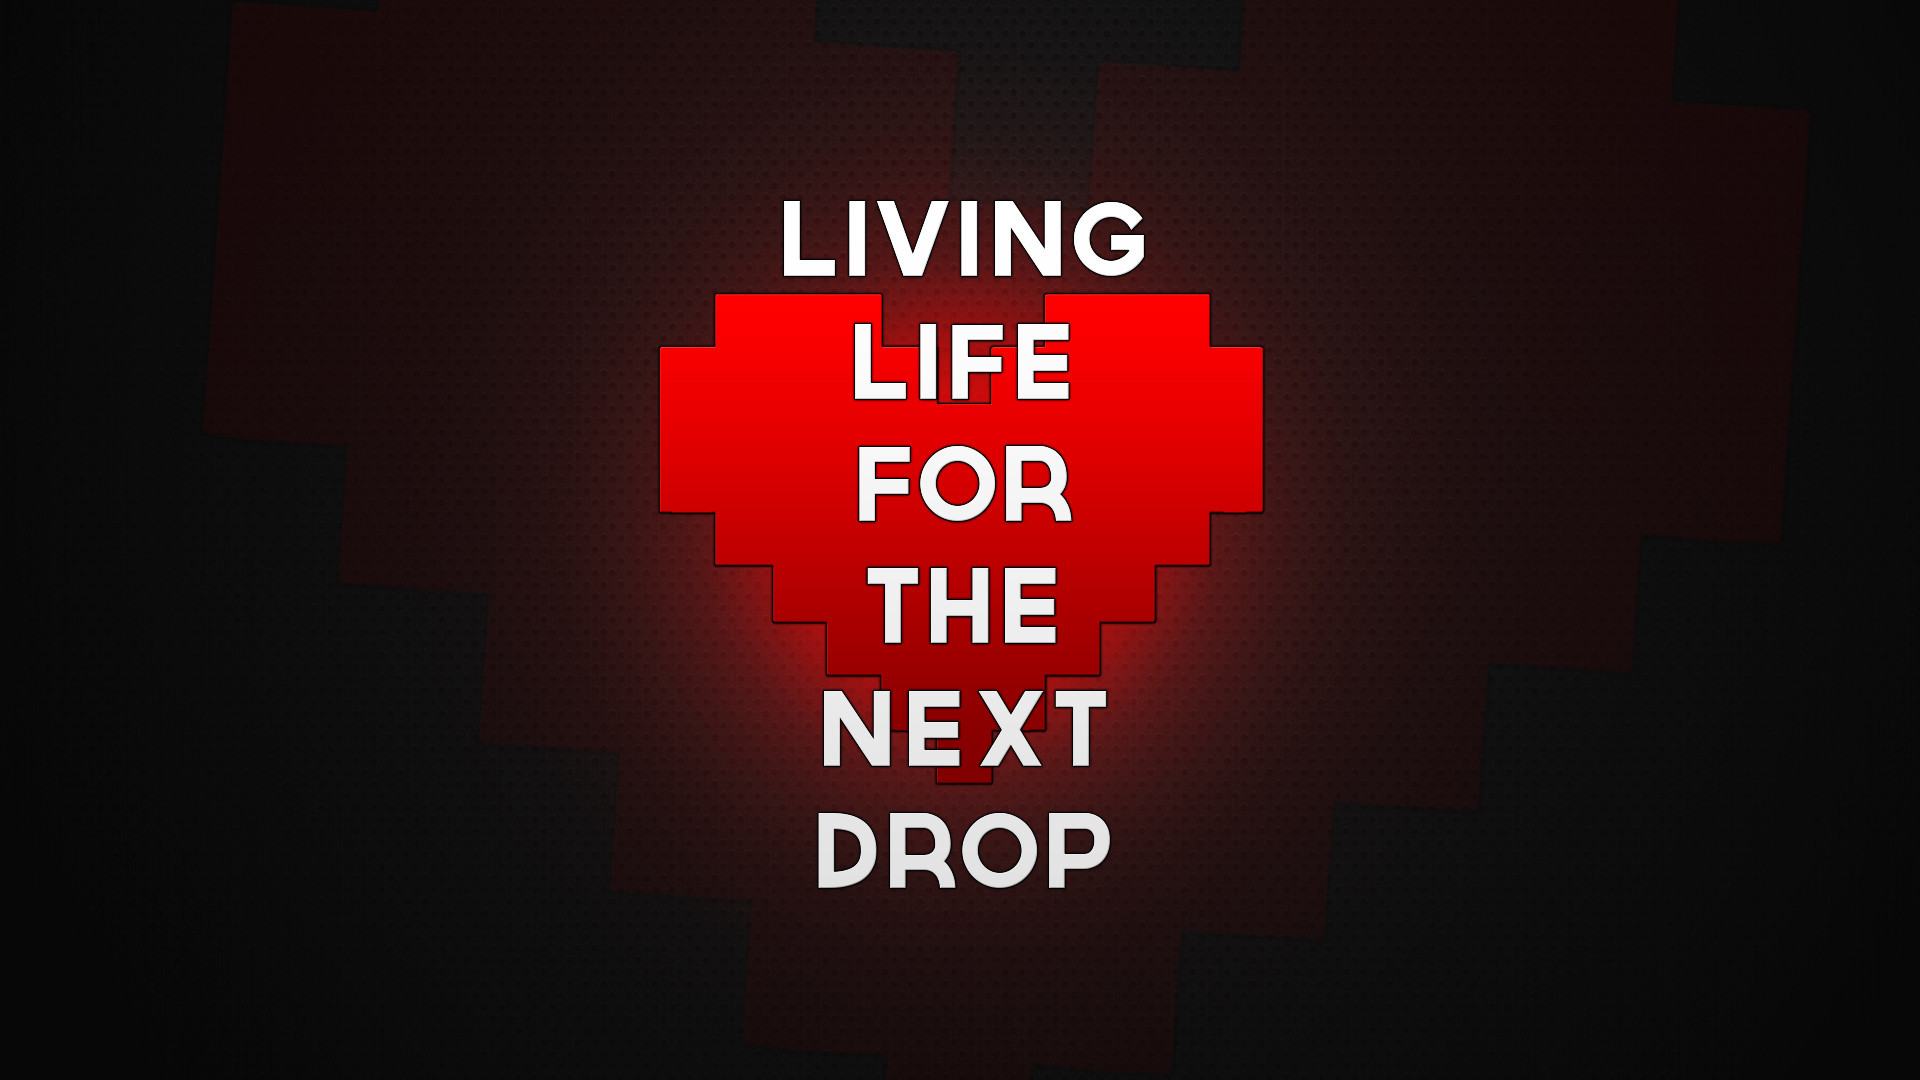 Put my life. Сон дроп обои. For next. Pegboard Nerds Full Hearts. Live the Life.